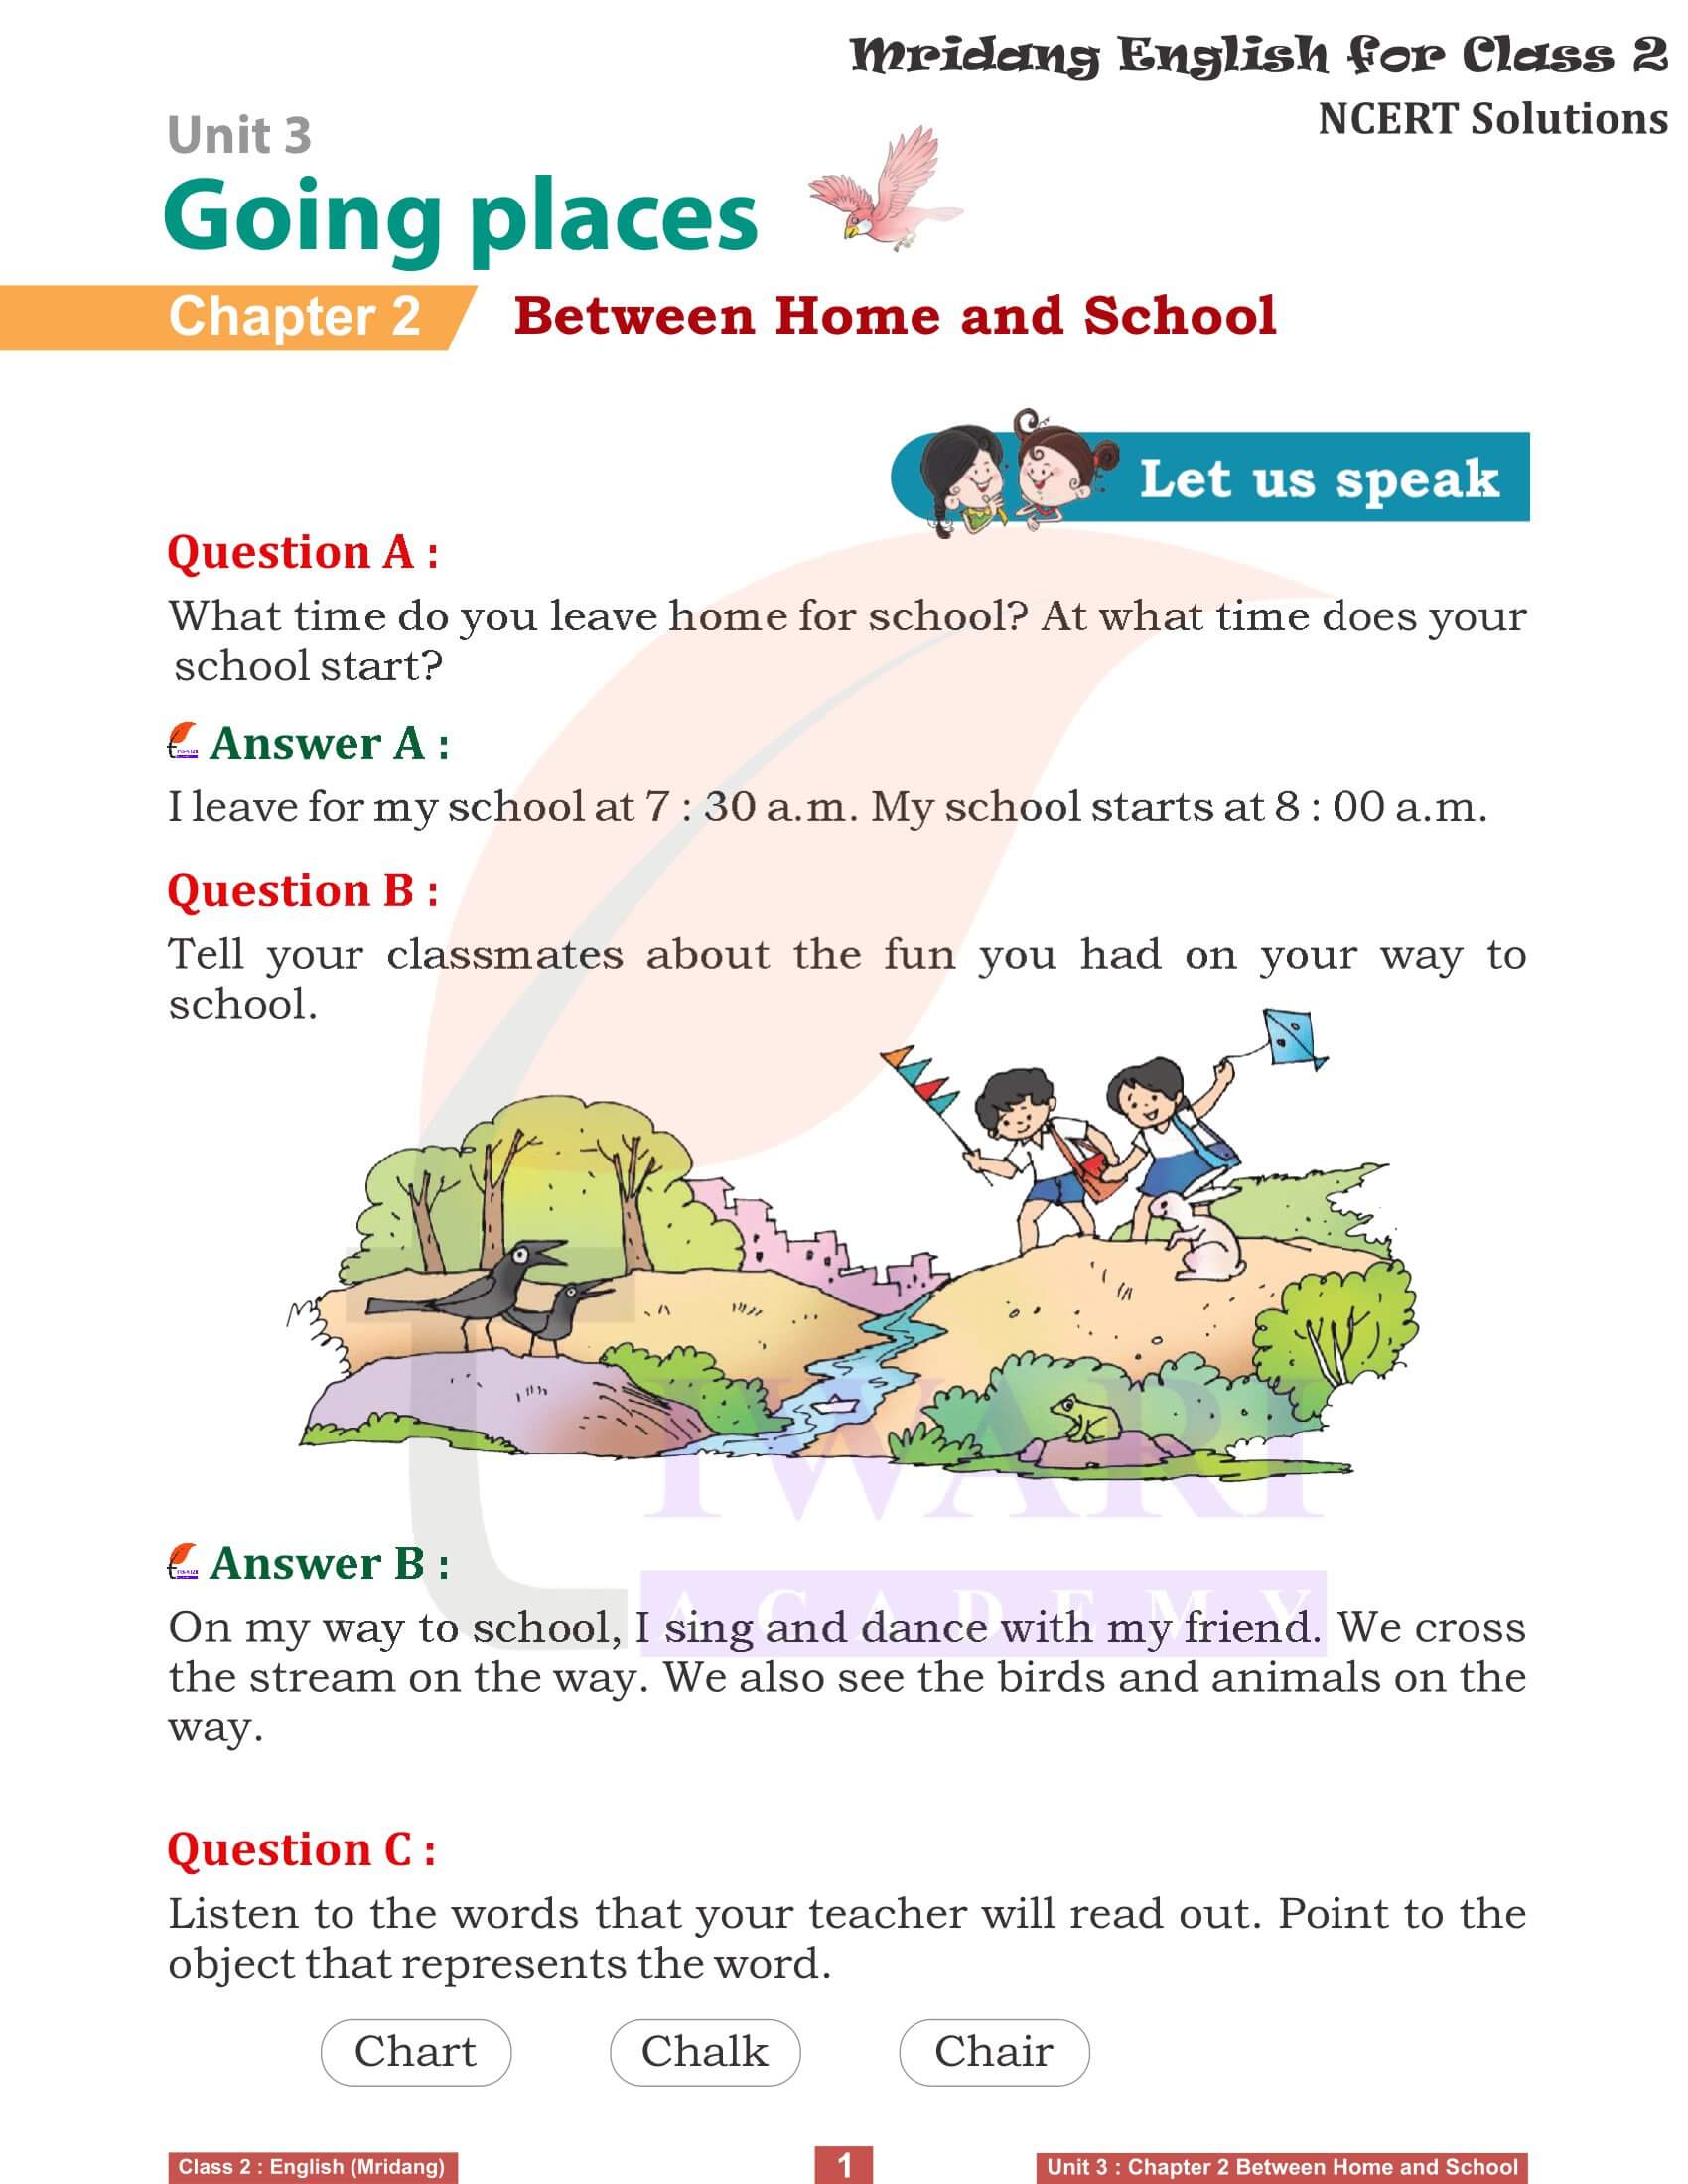 NCERT Solutions for Class 2 English Mridang Unit 3 Going Places Come Back Chapter 2 Between Home and School